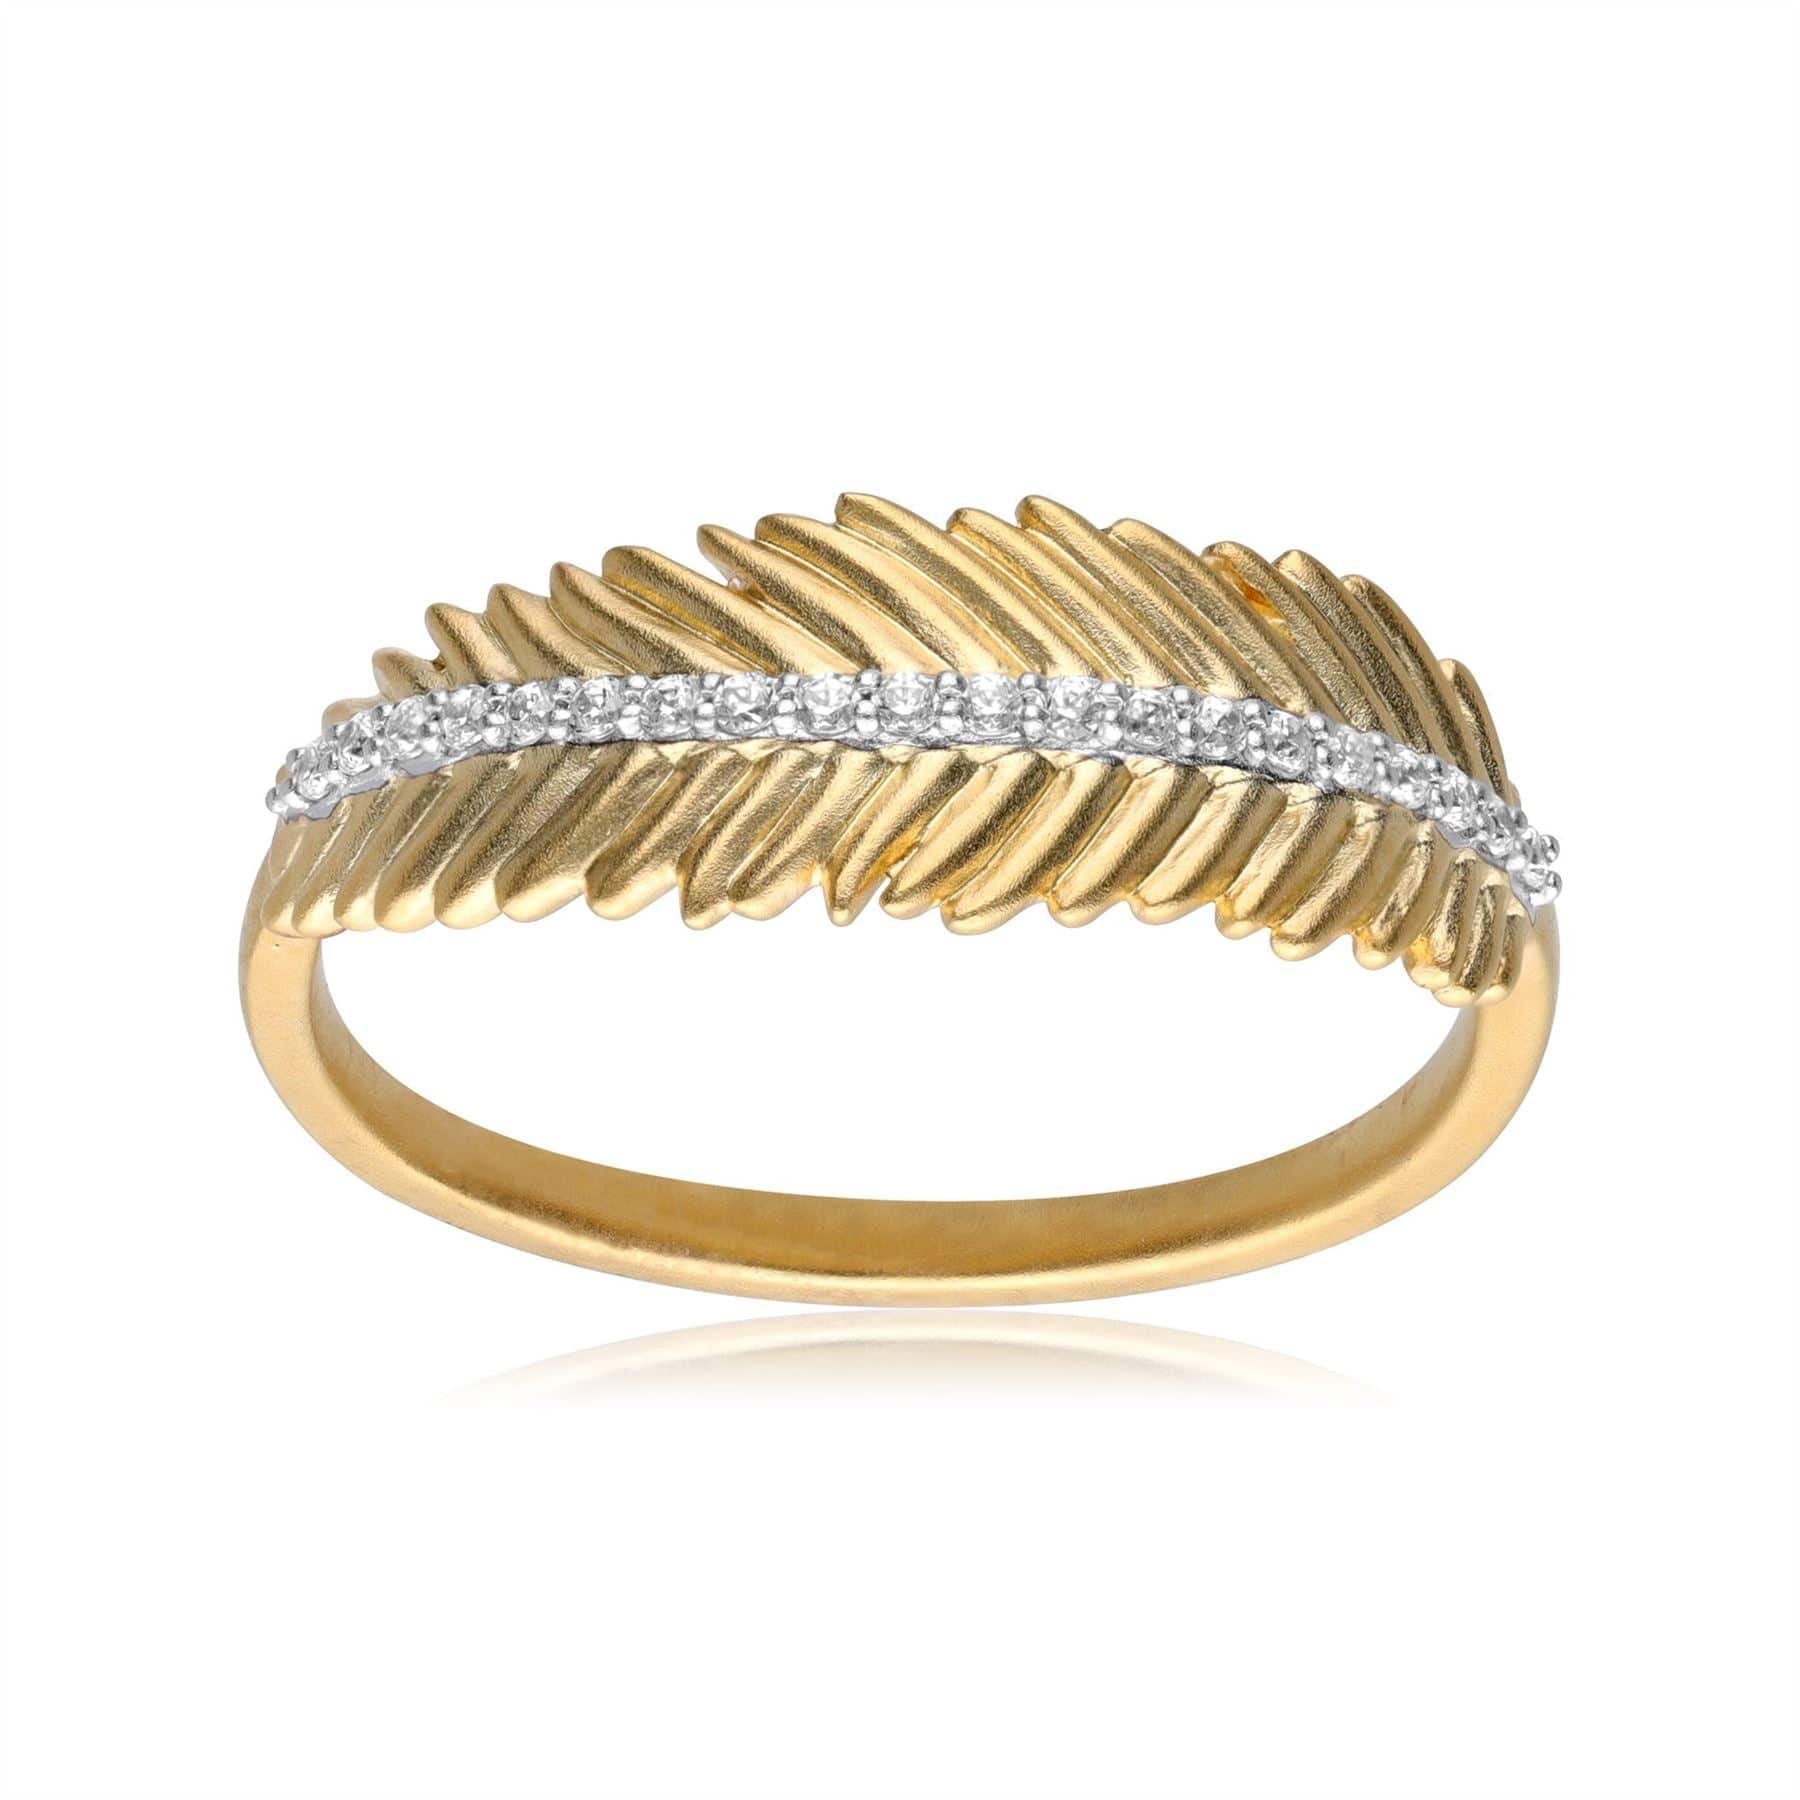 Gemondo ECFEW™ 'The Unifier' Diamond Feather Ring In 9ct Gold